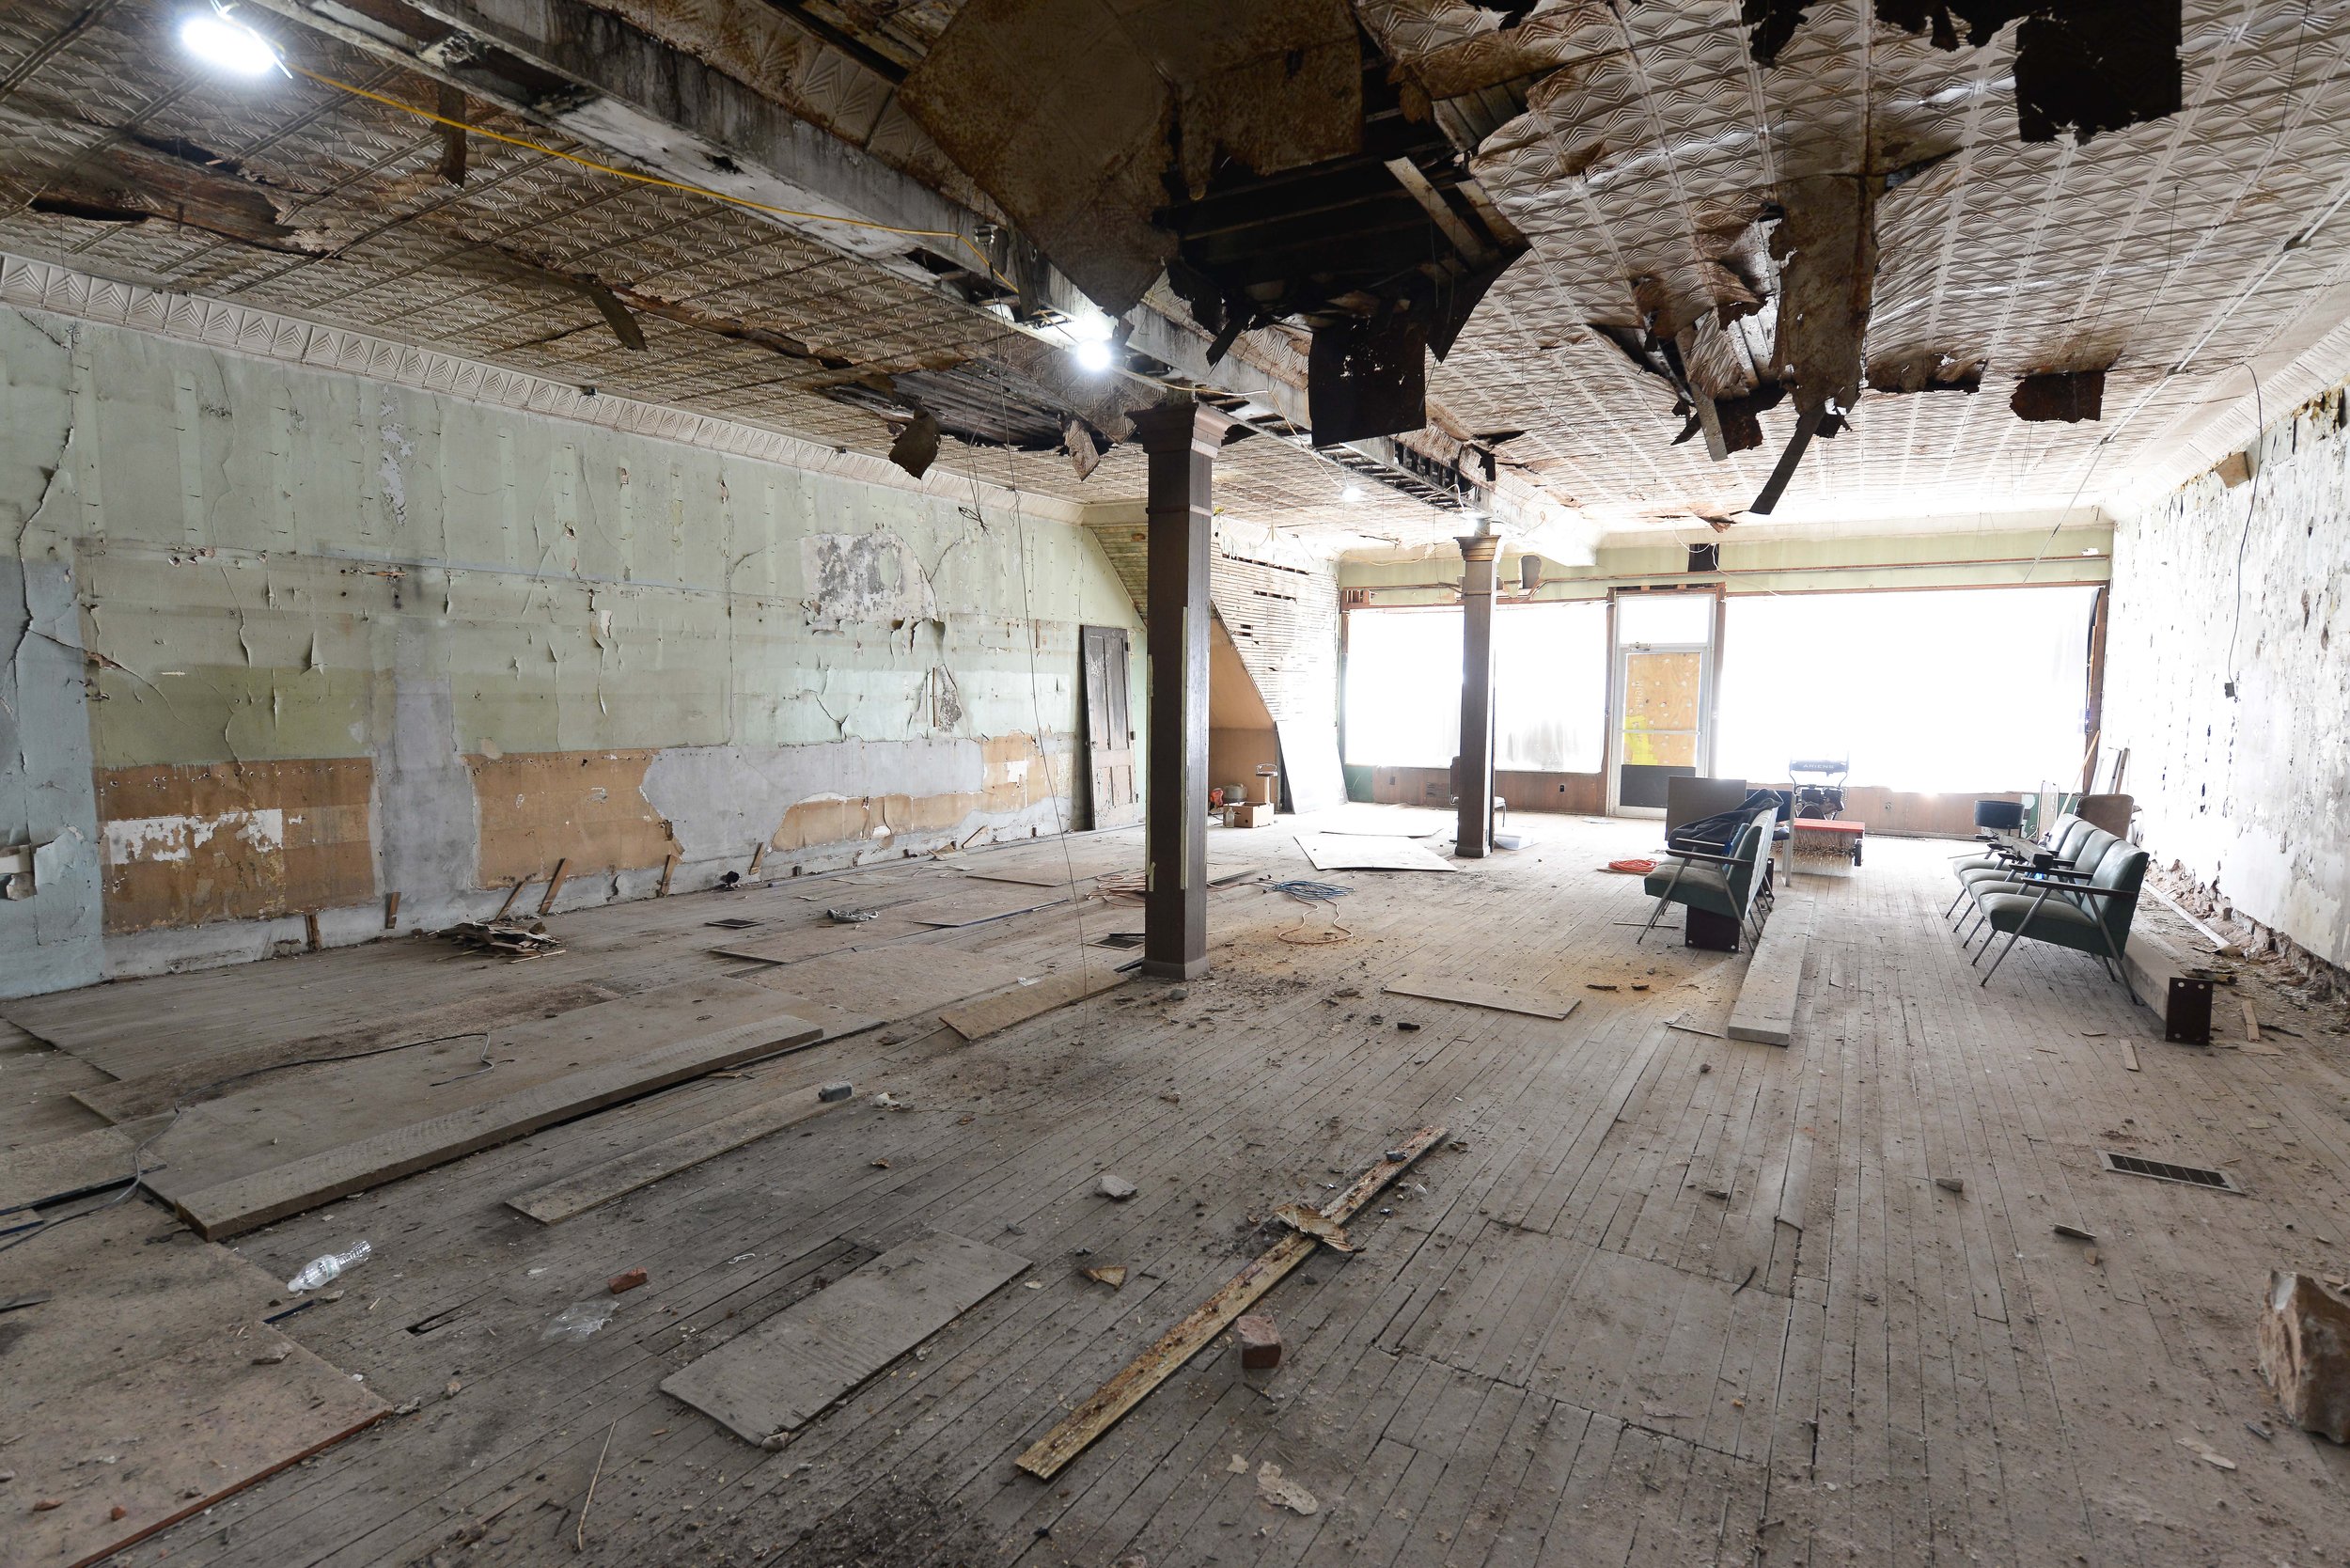 Interior space before renovation, facing the front storefront windows. Photo by John Smillie